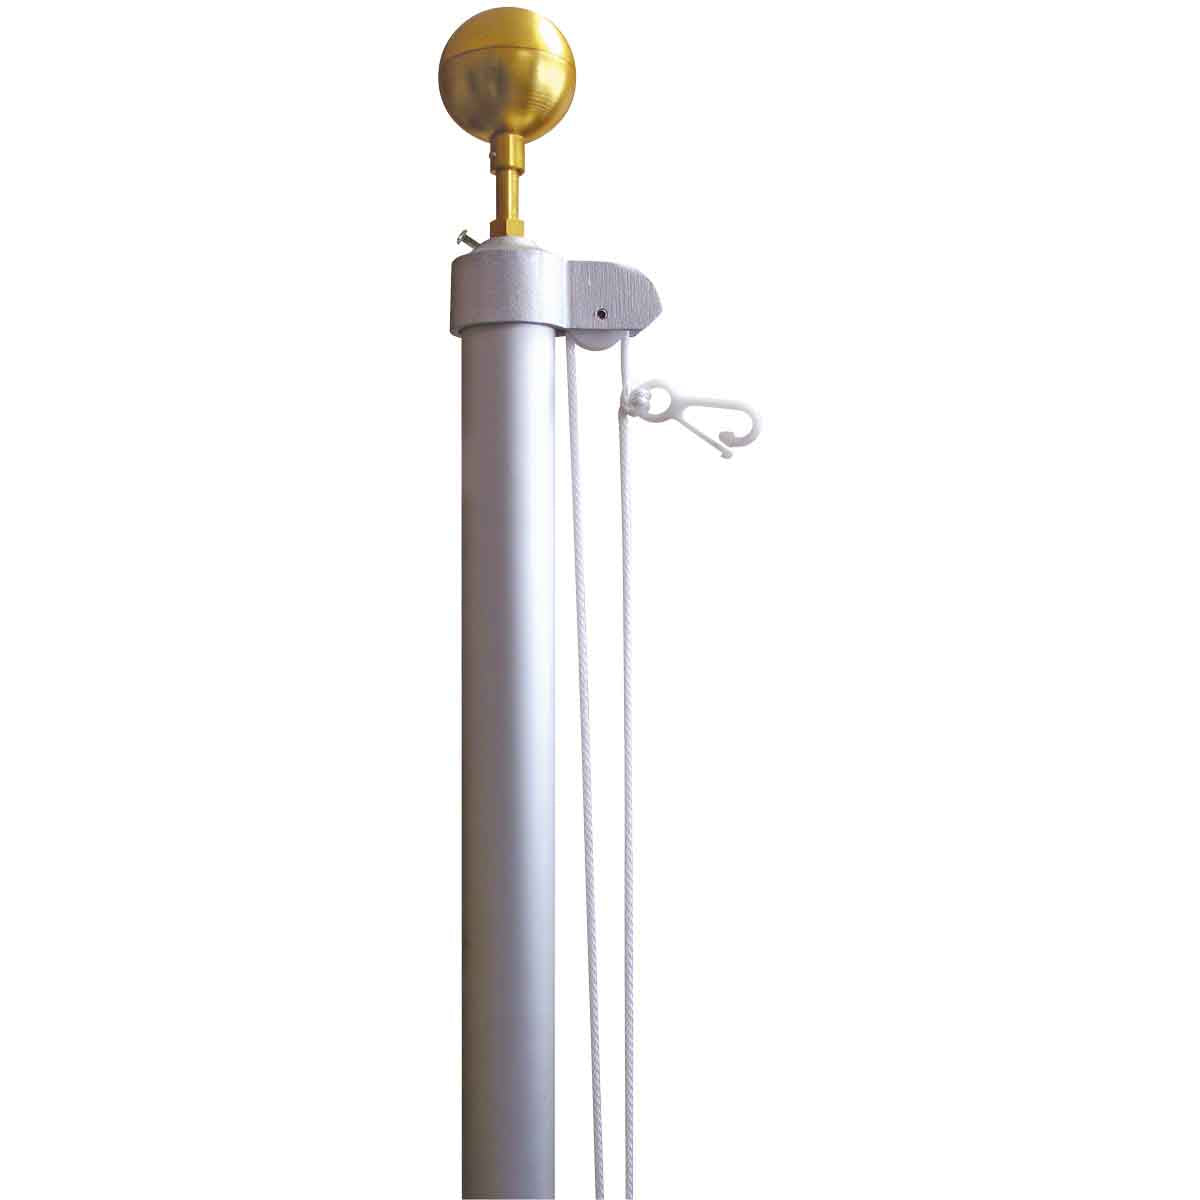 10' Homesteader Vertical Wall Mounted Flagpole Complete Sets